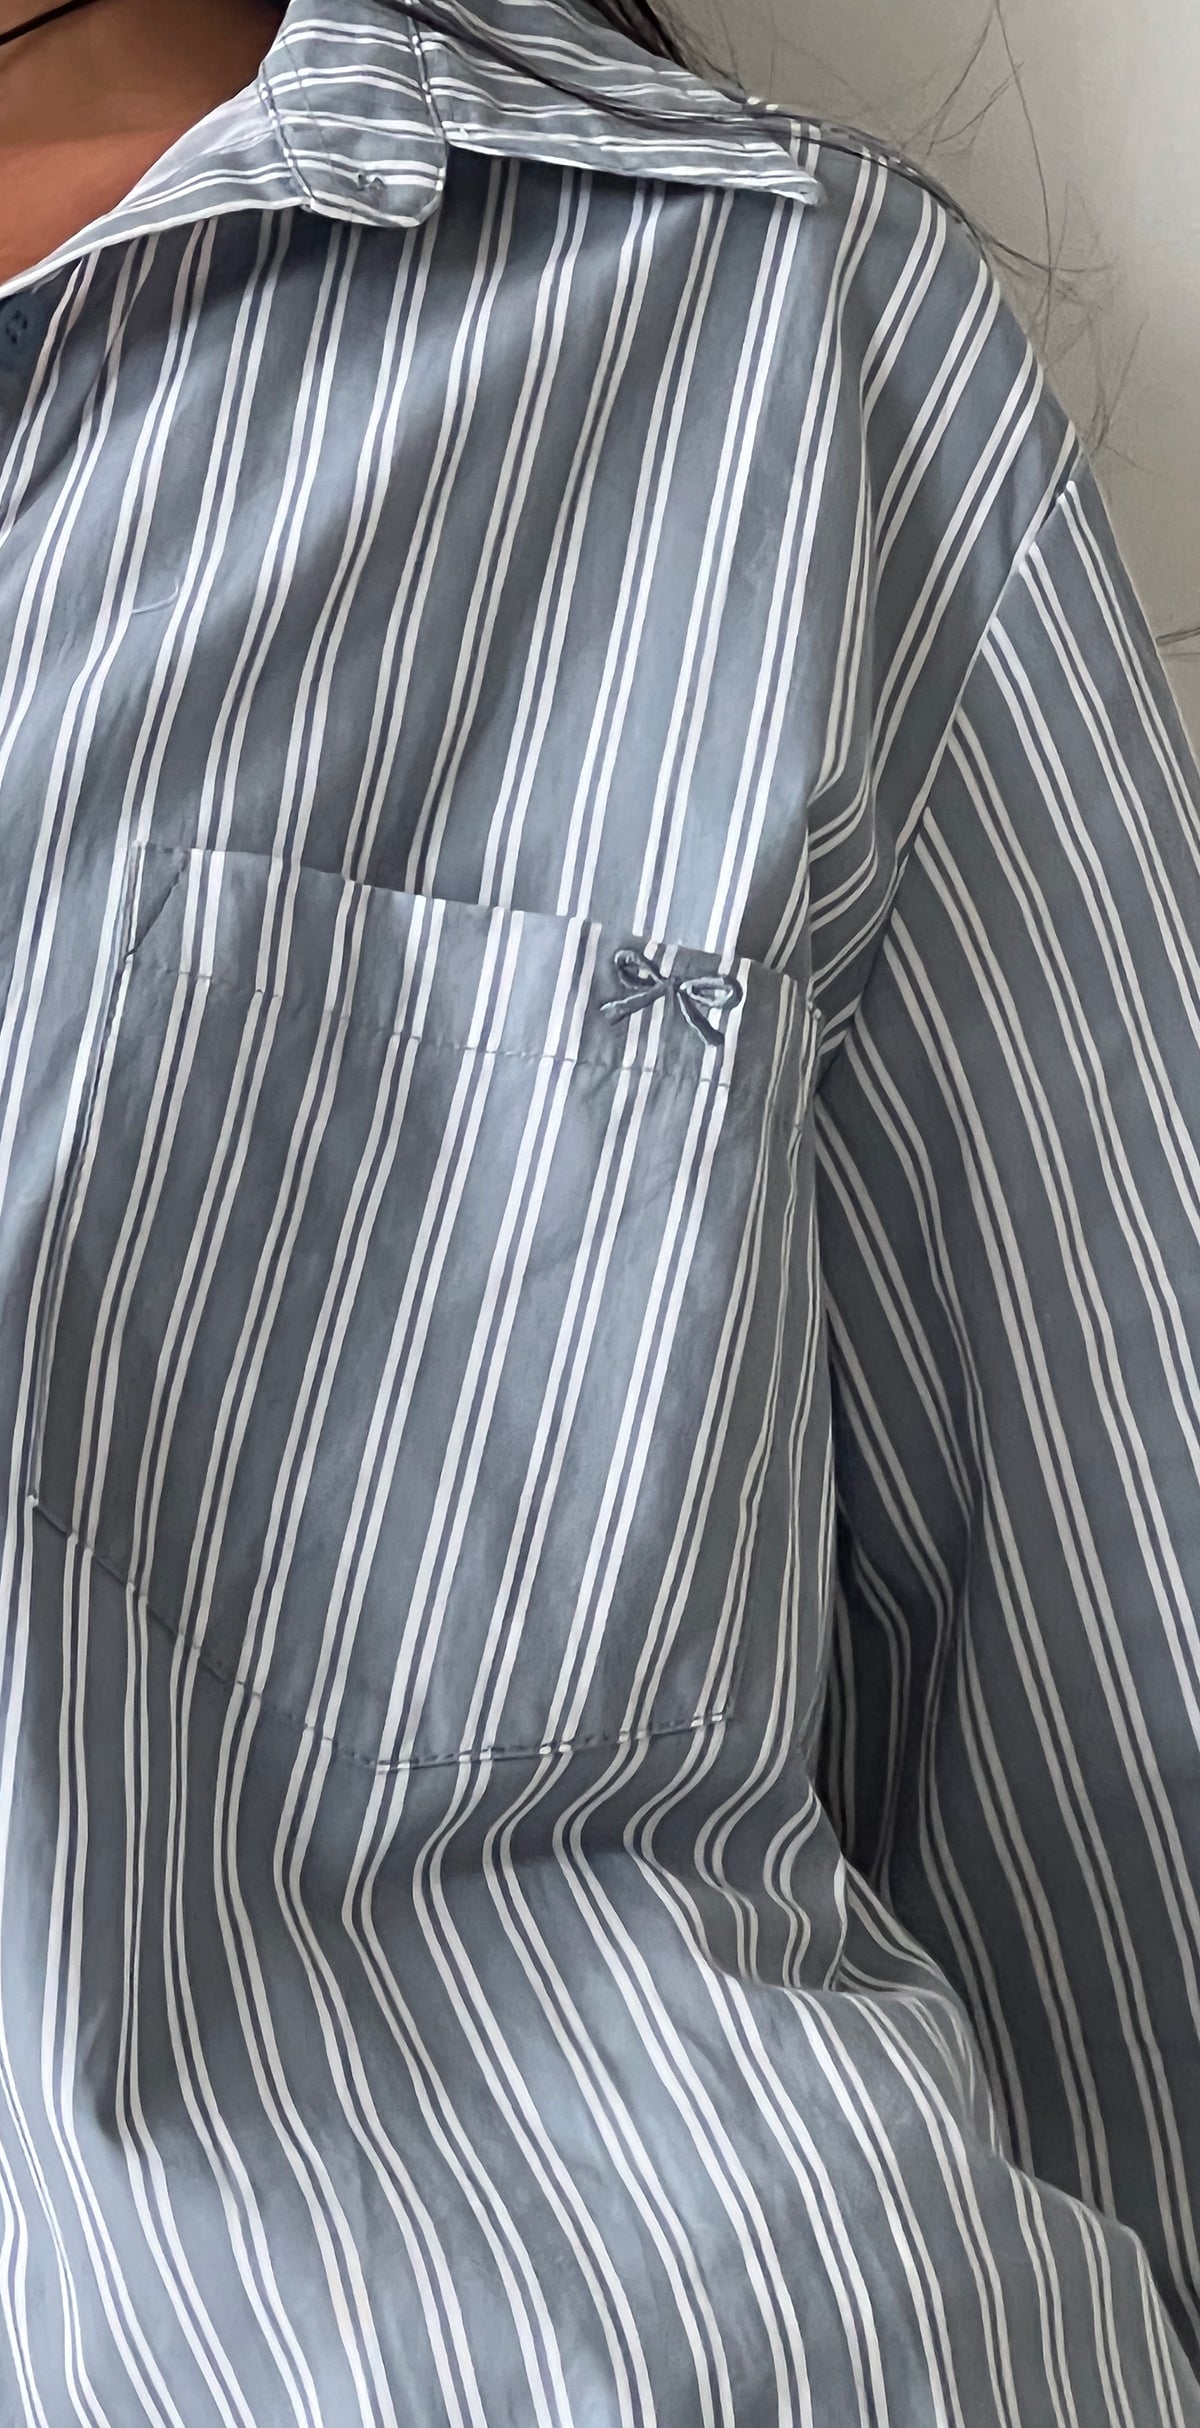 Turner Shirt in Grey and White Stripe with M Embroidery | Turner ...